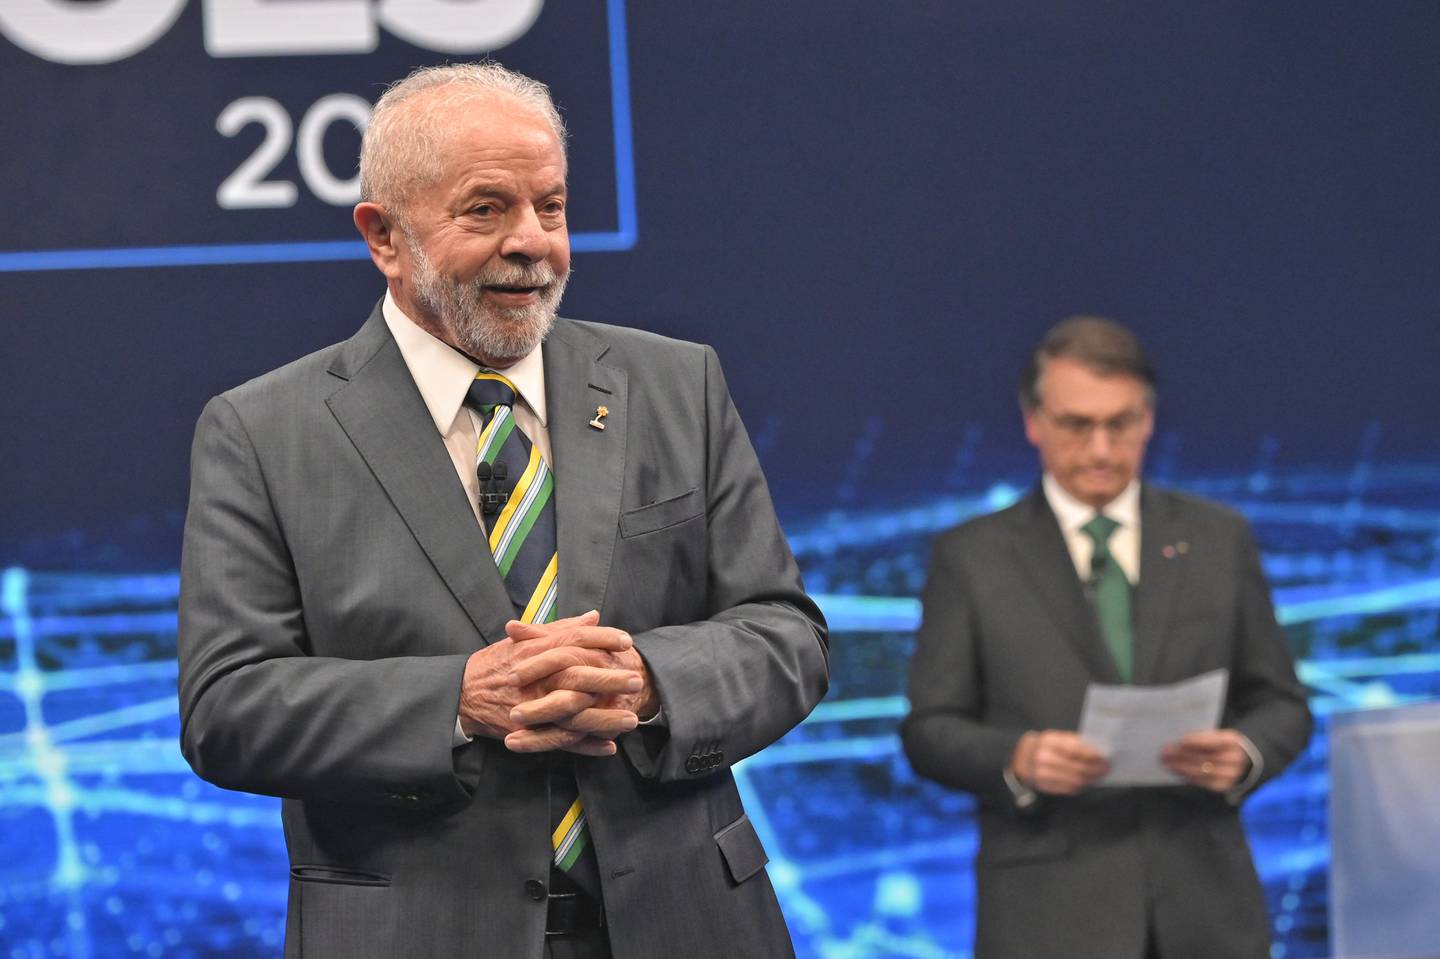 Lula said he intends to try to approve a reform to exempt those earning less than 5,000 reais ($947) per month from income tax, to tax dividends and to ease the burden on the poorestdfd